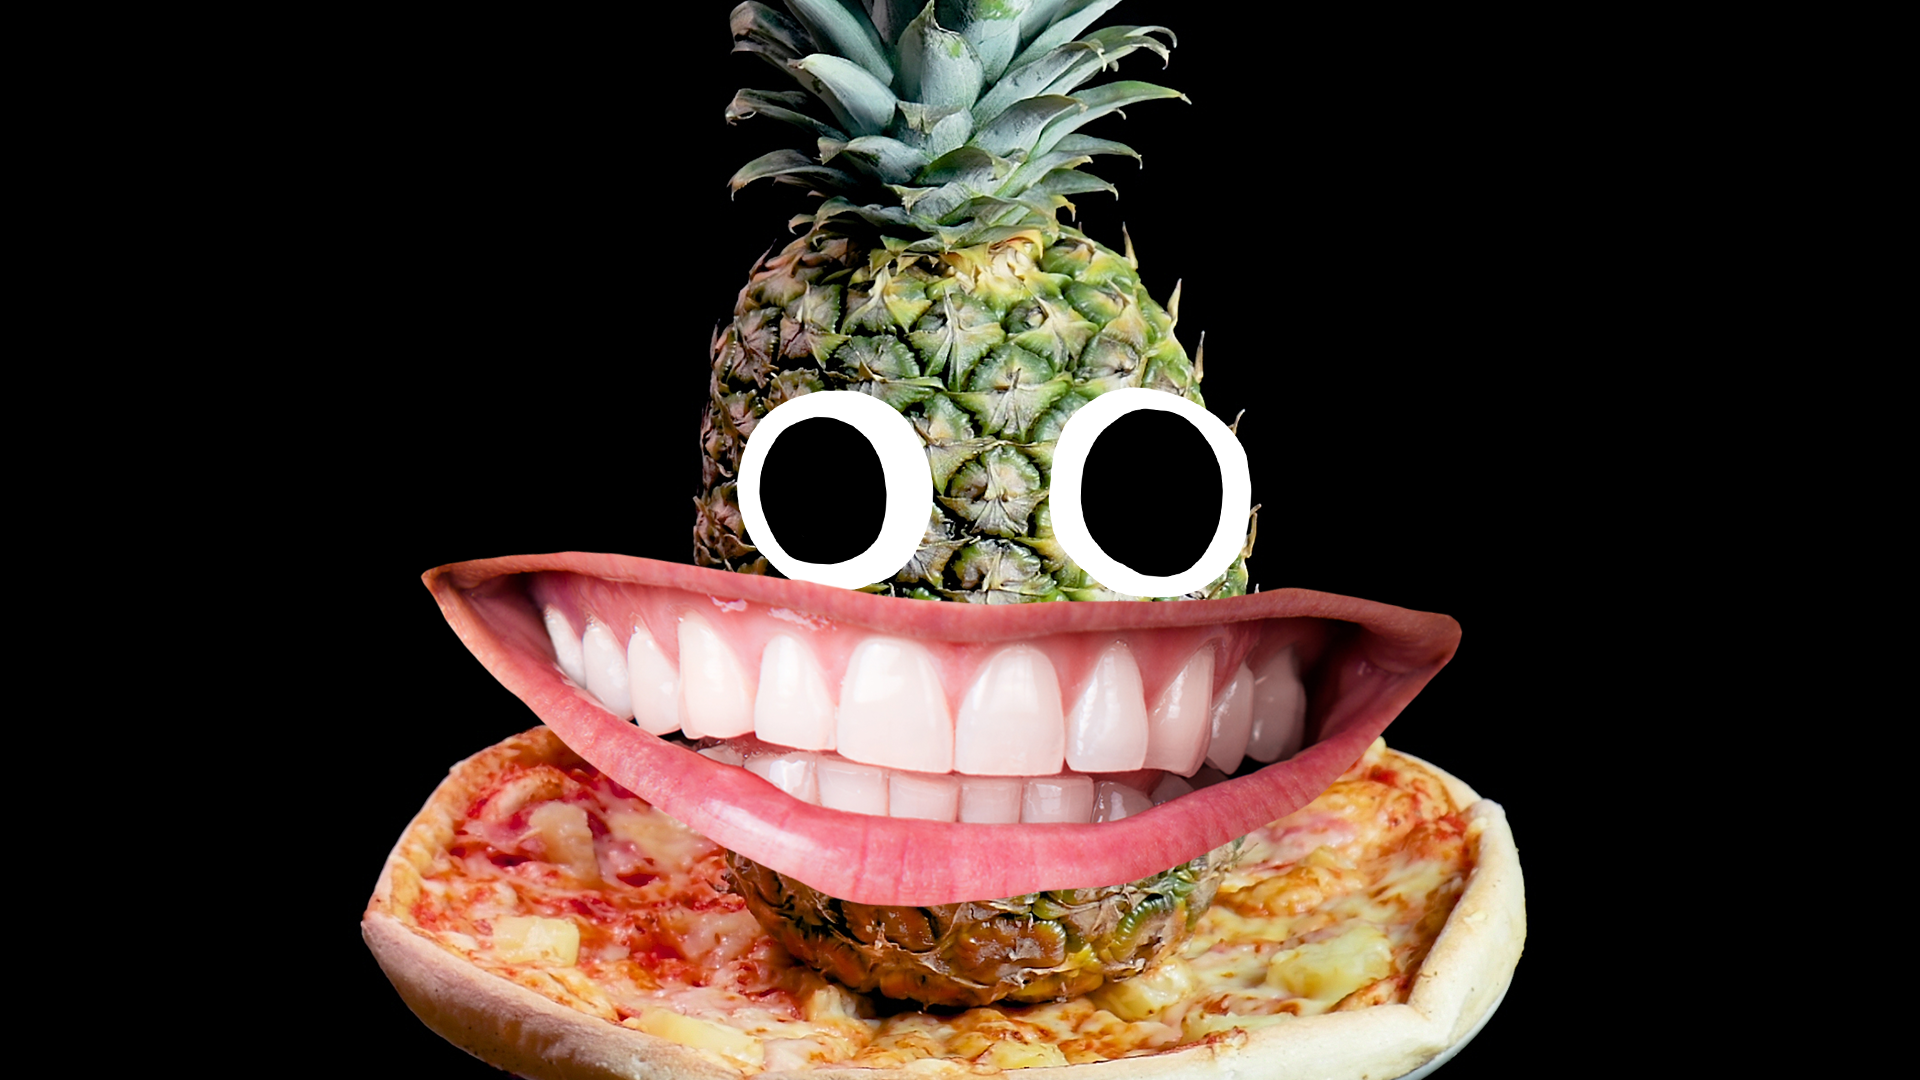 Pineapple on a pizza with goofy face